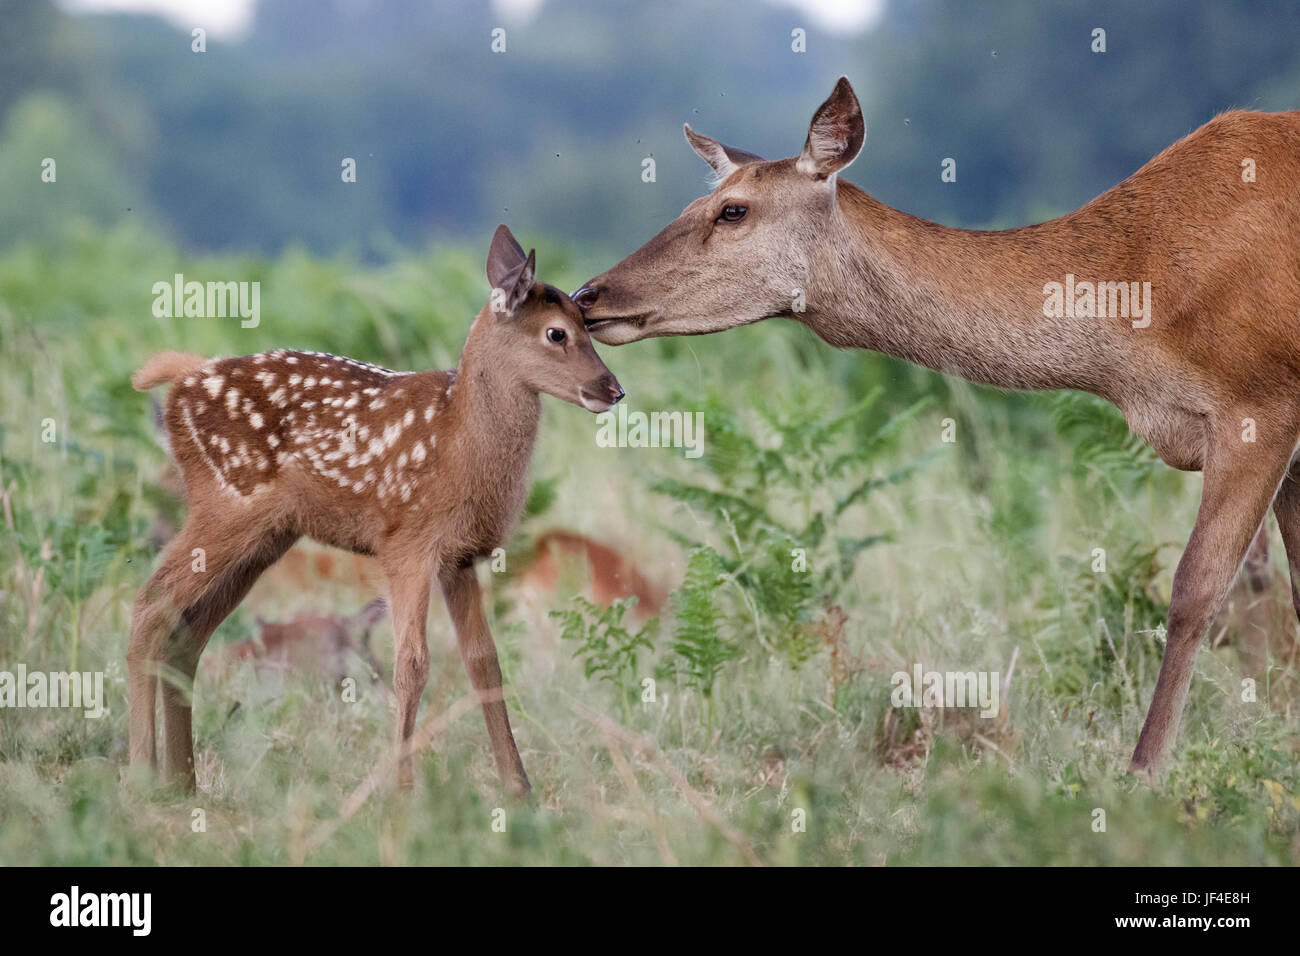 Red deer (Cervus elaphus) female hind mother and young baby calf having a tender bonding moment Stock Photo